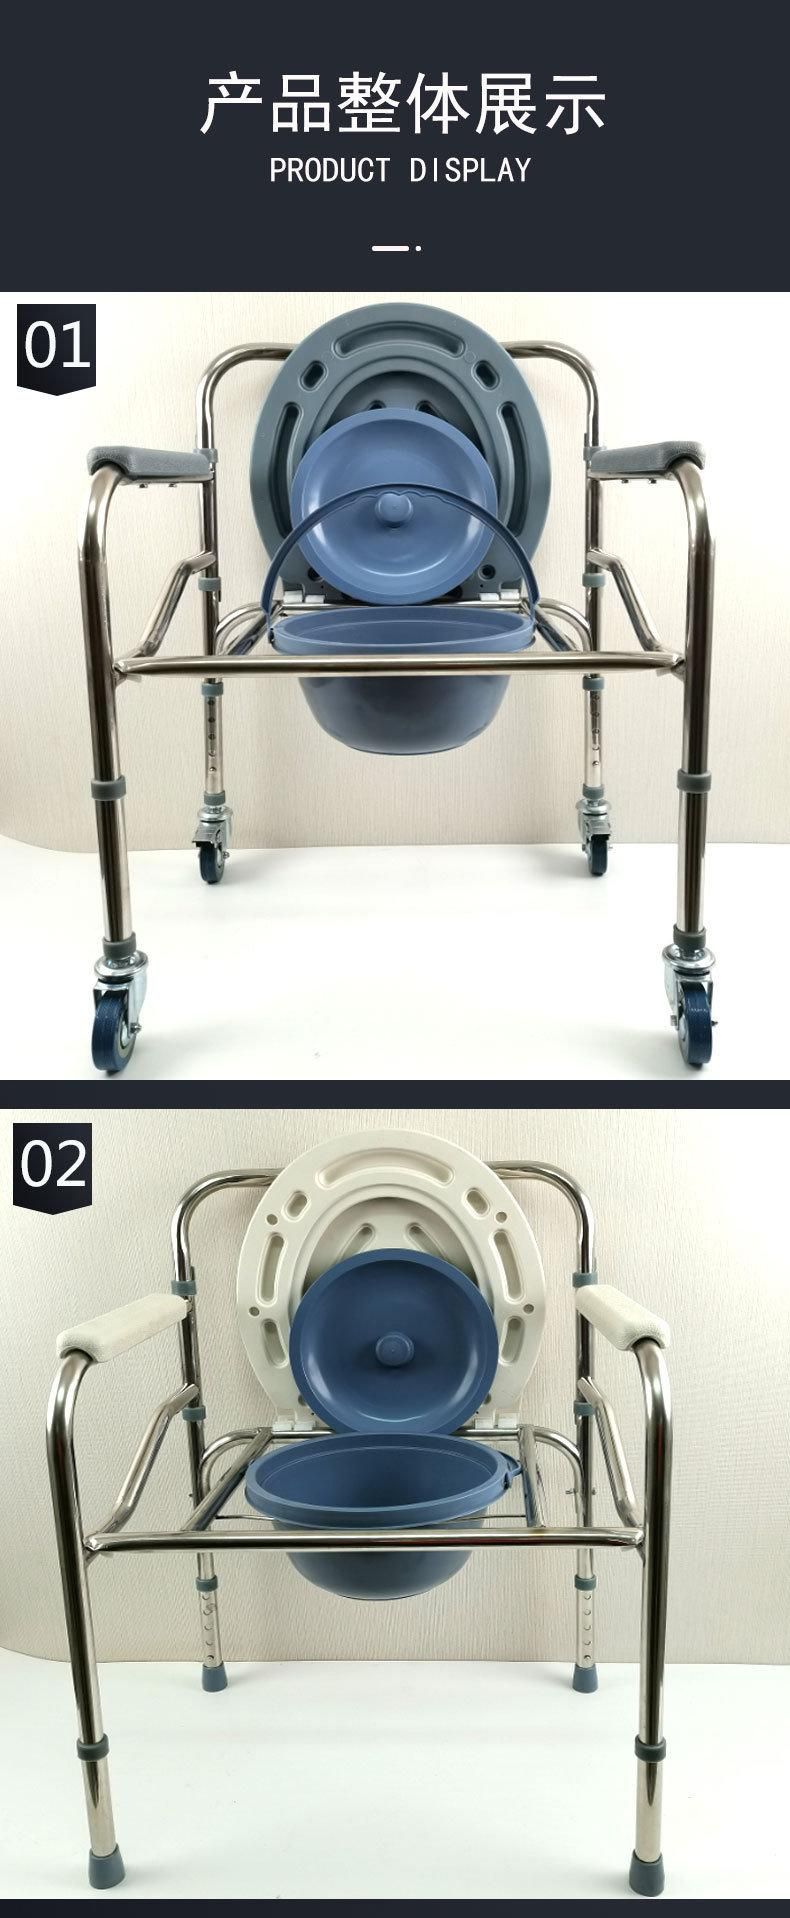 Hot Sale Folding Aluminum Parts Disabled Commode with Wheels Chair Bme 668